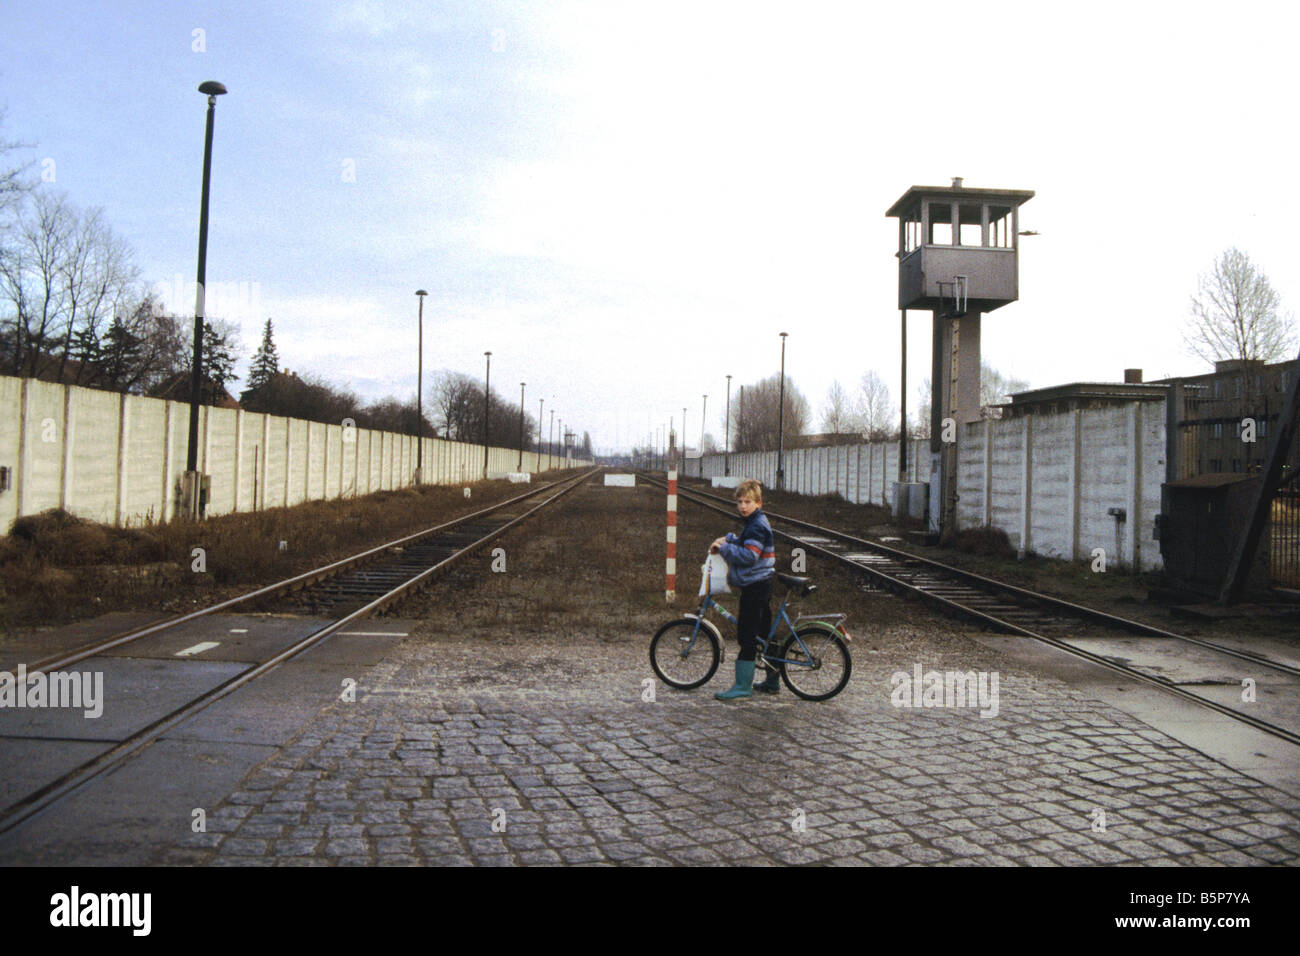 The Berlin Wall at Staaken at the end of the cold War 1991.  A young boy on a bicycle between the railway lines. Stock Photo